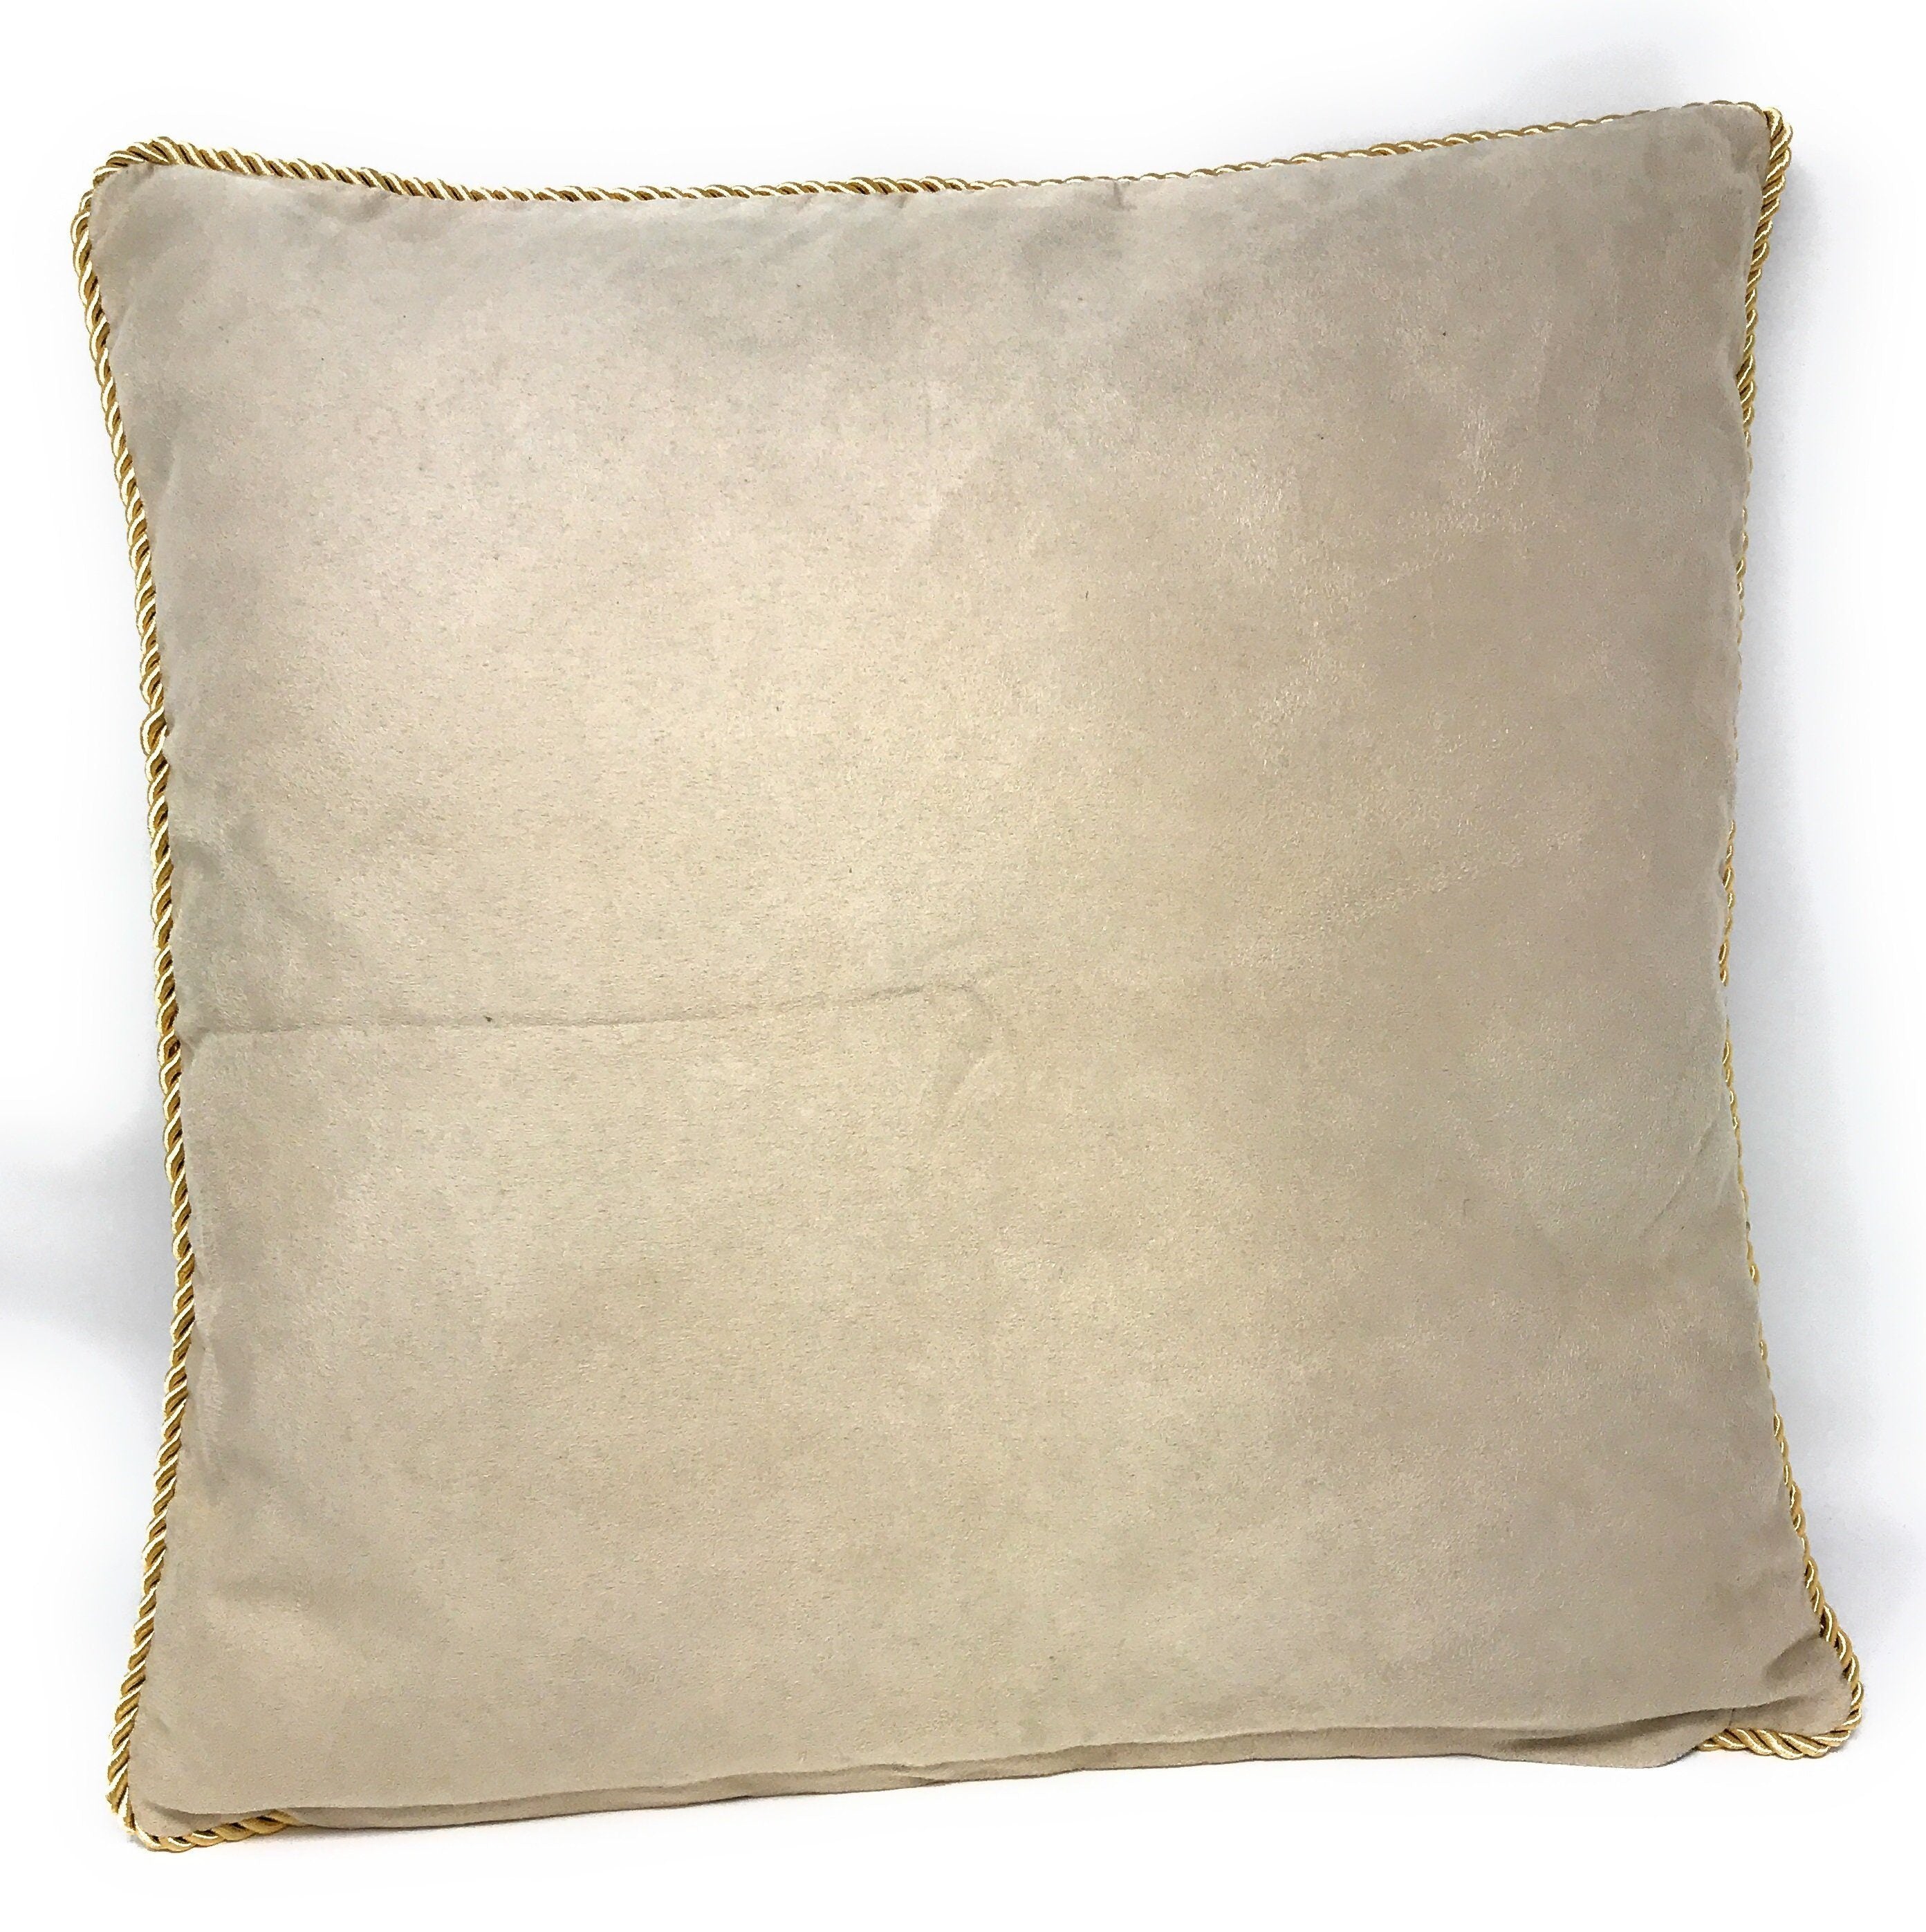 Artistic Weavers Rumbold 20 inch x 20 inch Pillow Cover